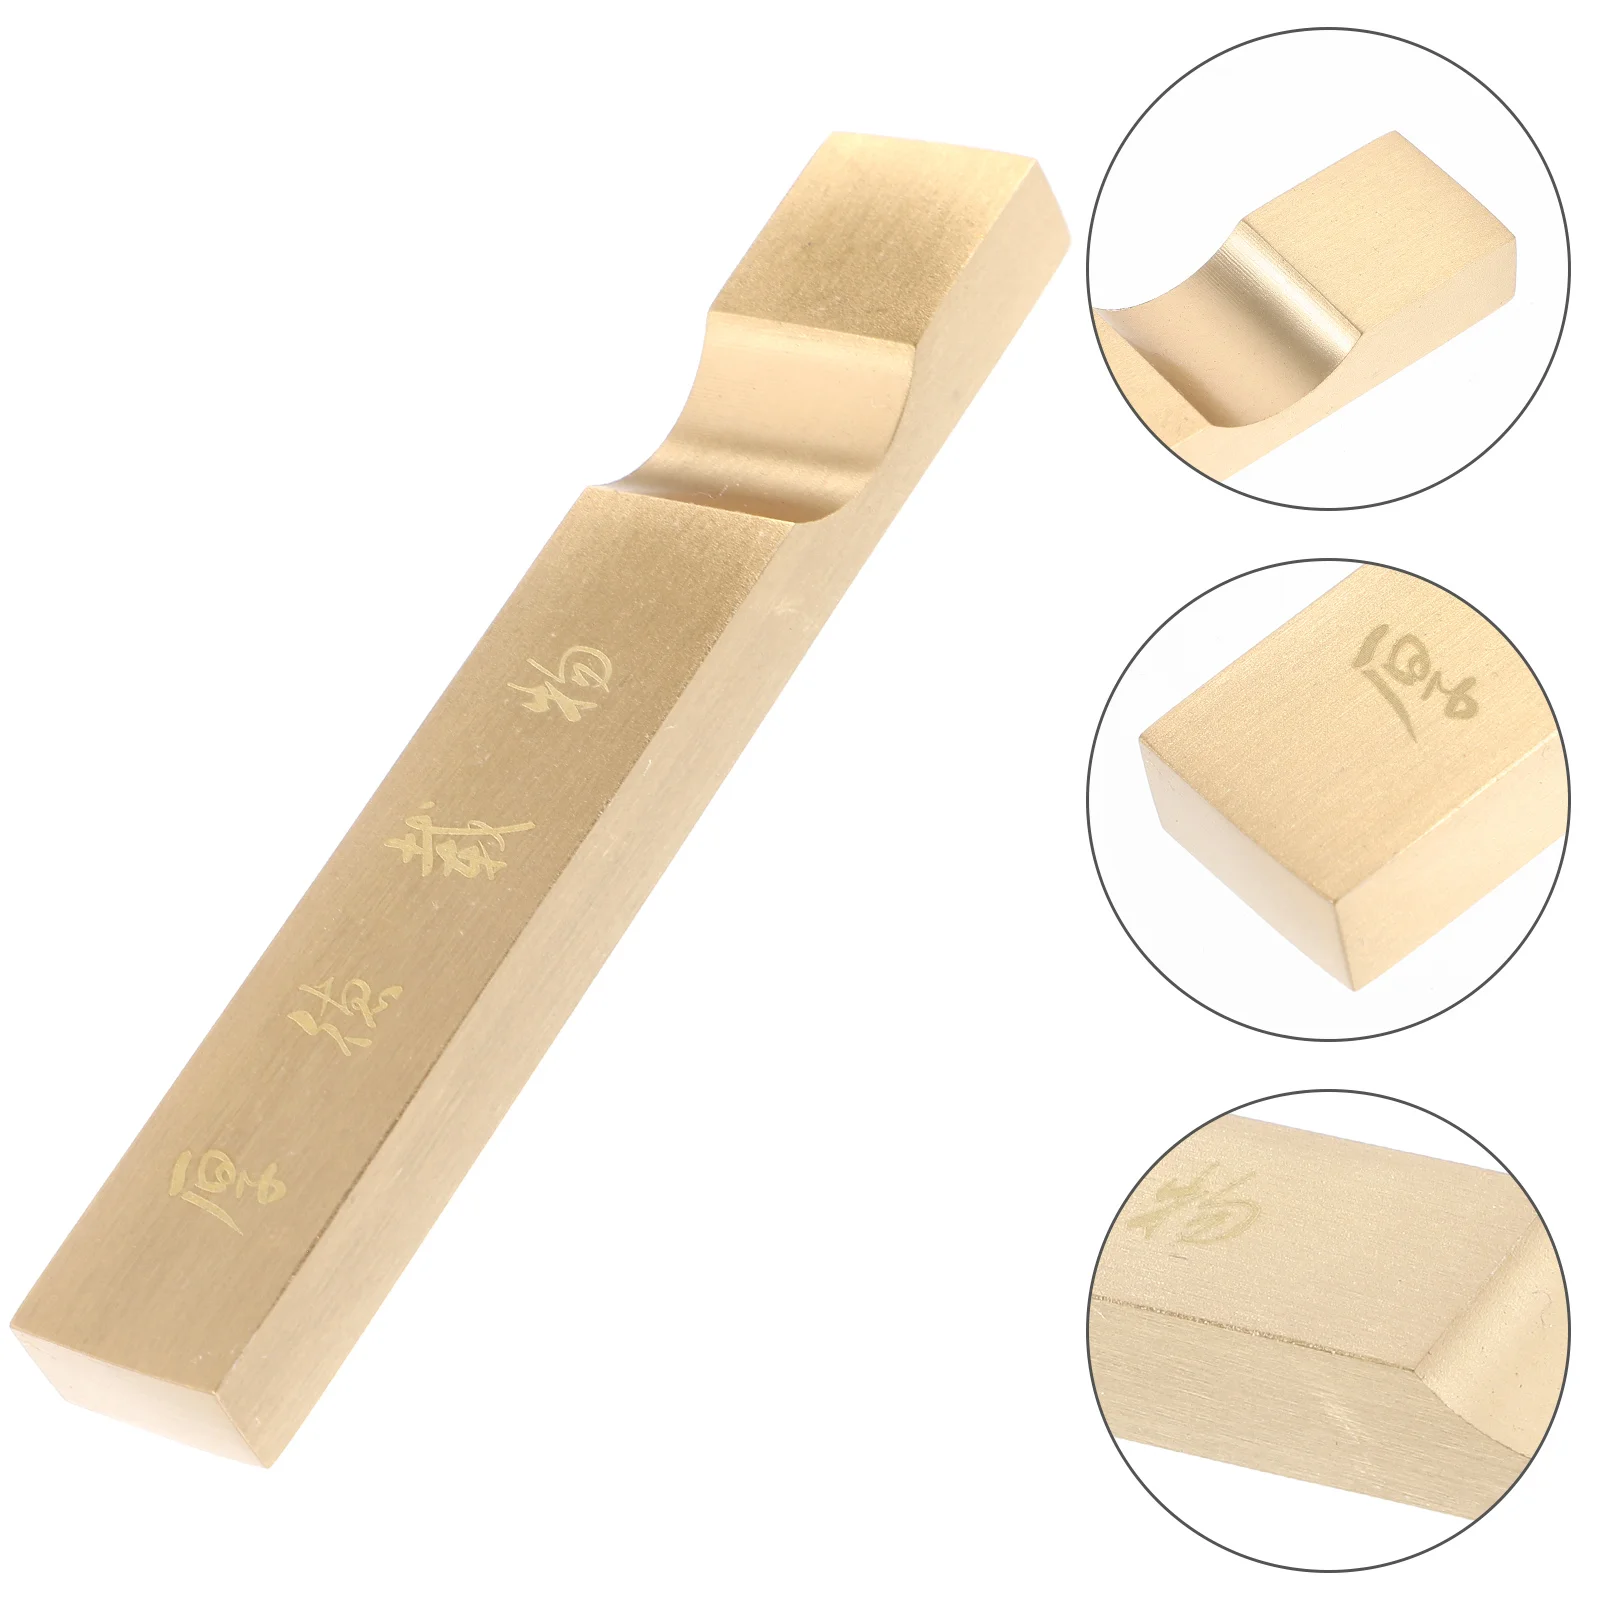 

The Four Treasures of Study Calligraphy Supplies Brass Rectangular Paper Weight Chinese Paperweight Weights